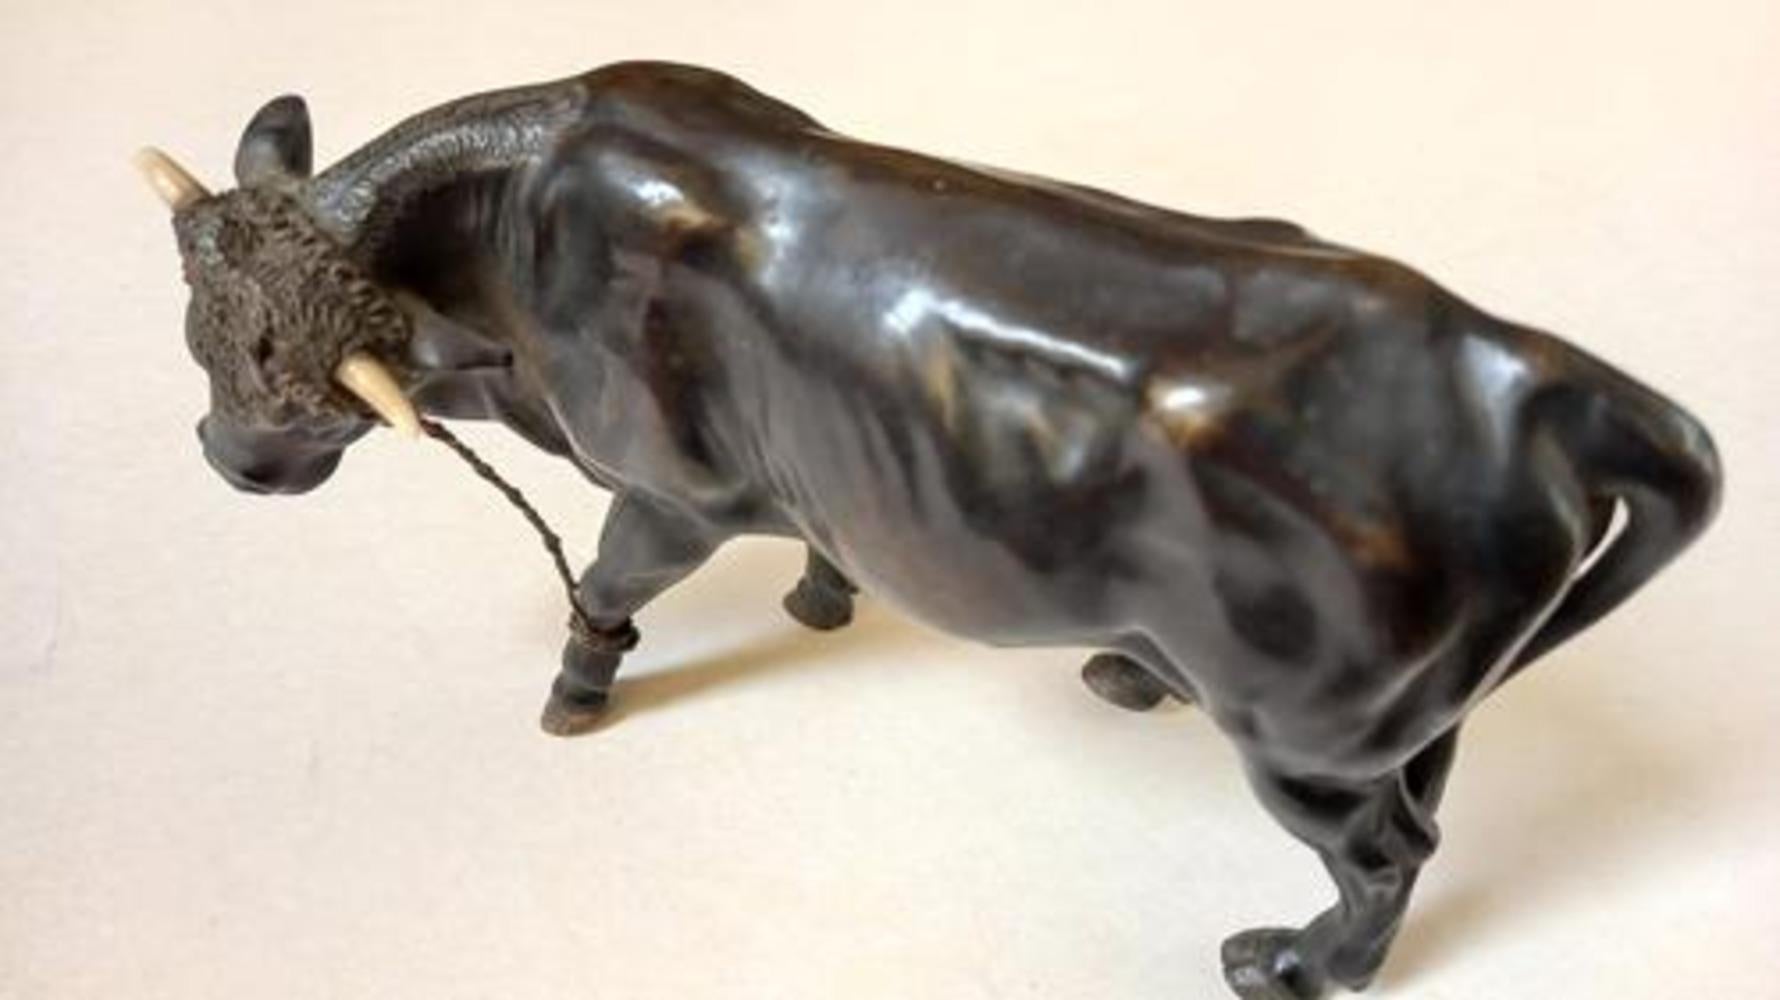 A beautifully modelled bronze bull of classic form.

The piece measures approximately 15cm x 8.5cm x 5cm or 6 inches x 8.5 inches x 2 inches.